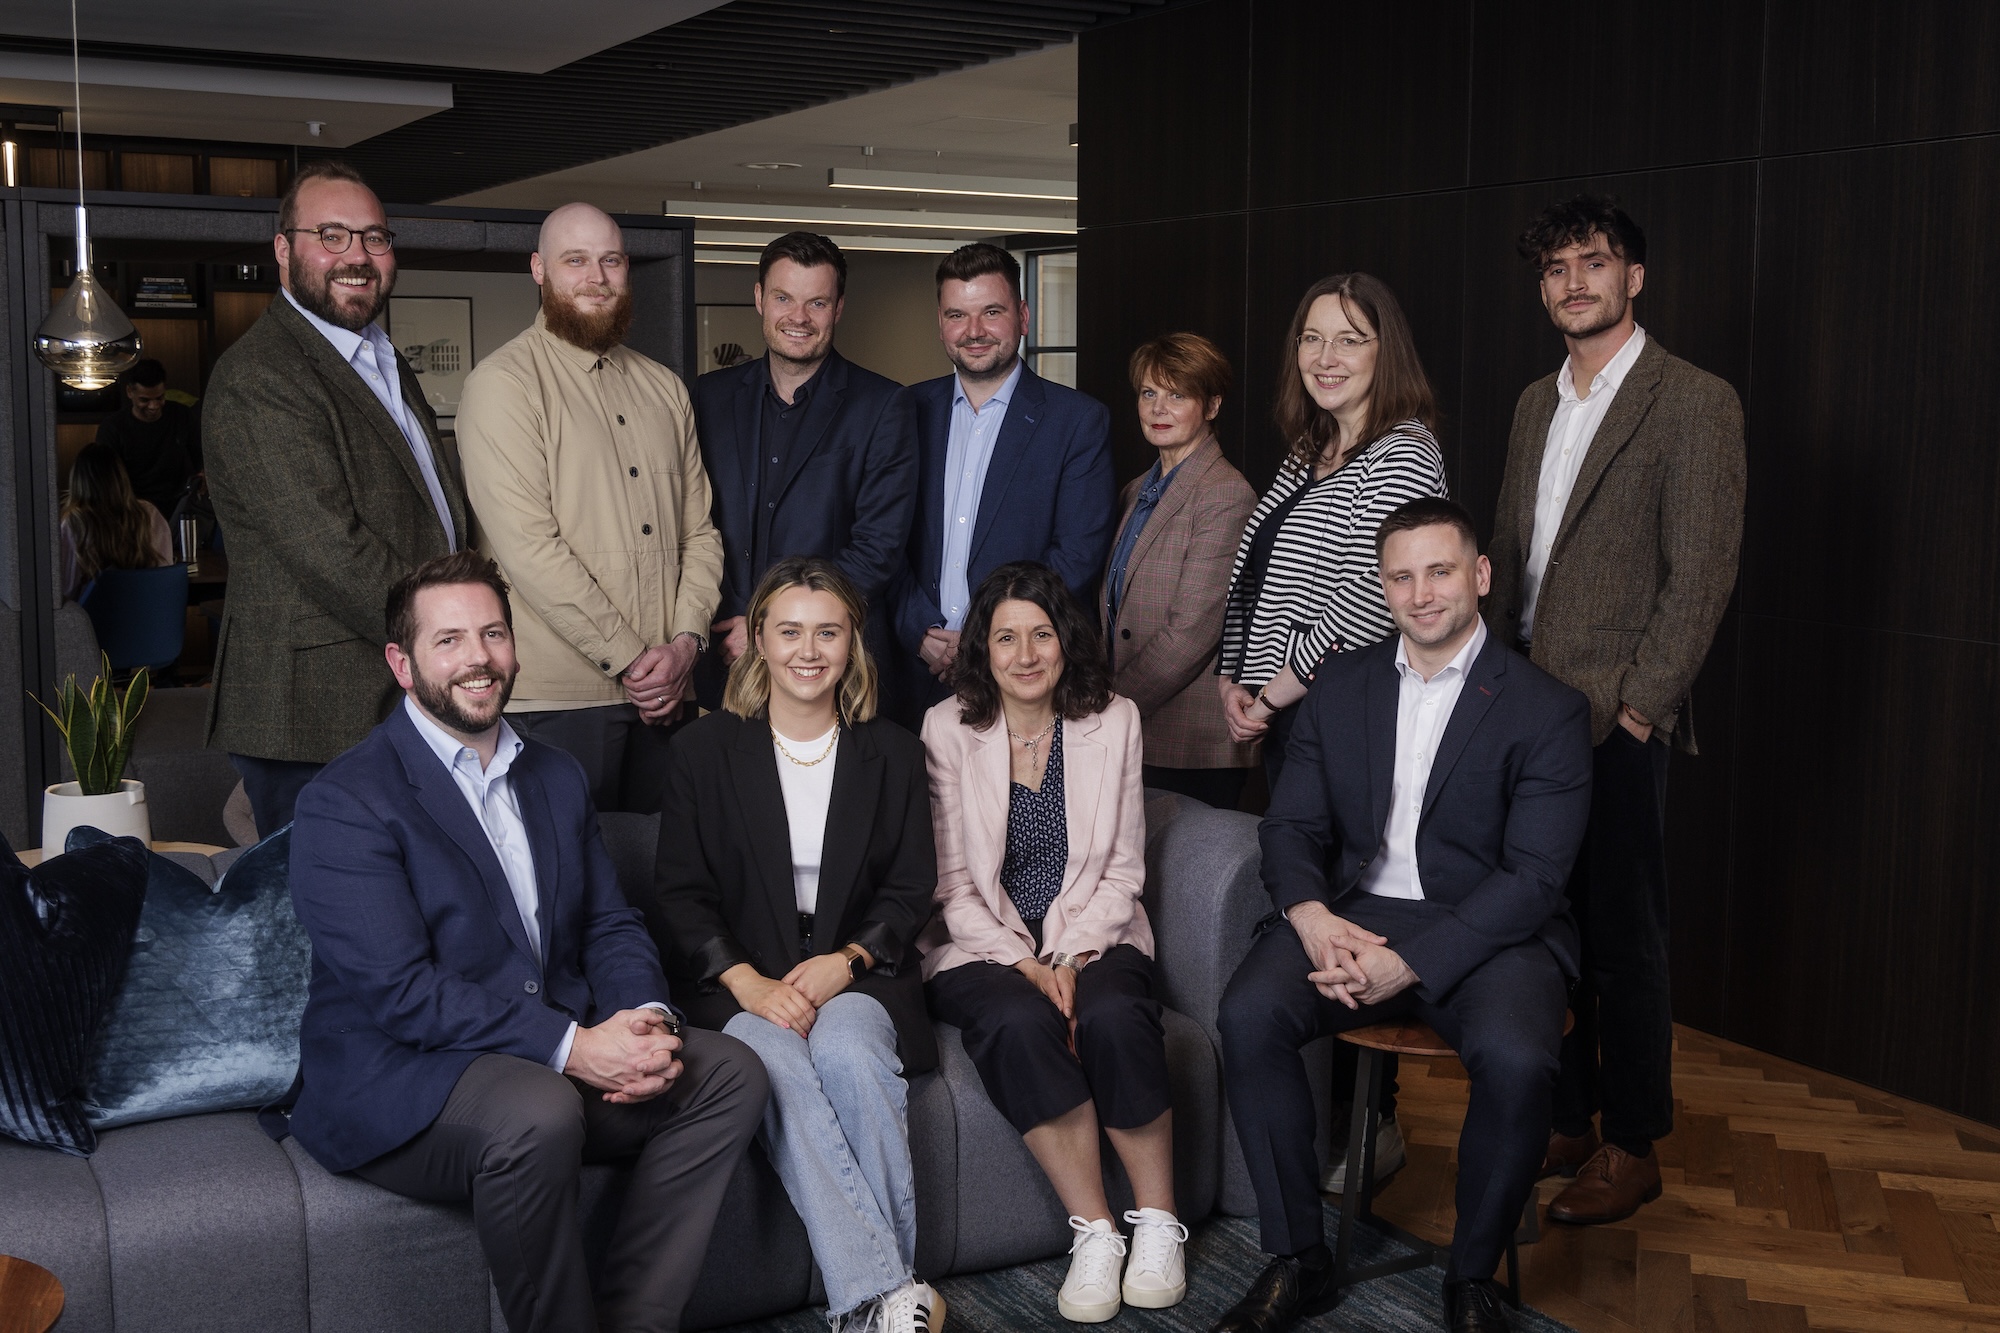 True North expands services with four new expert advisors